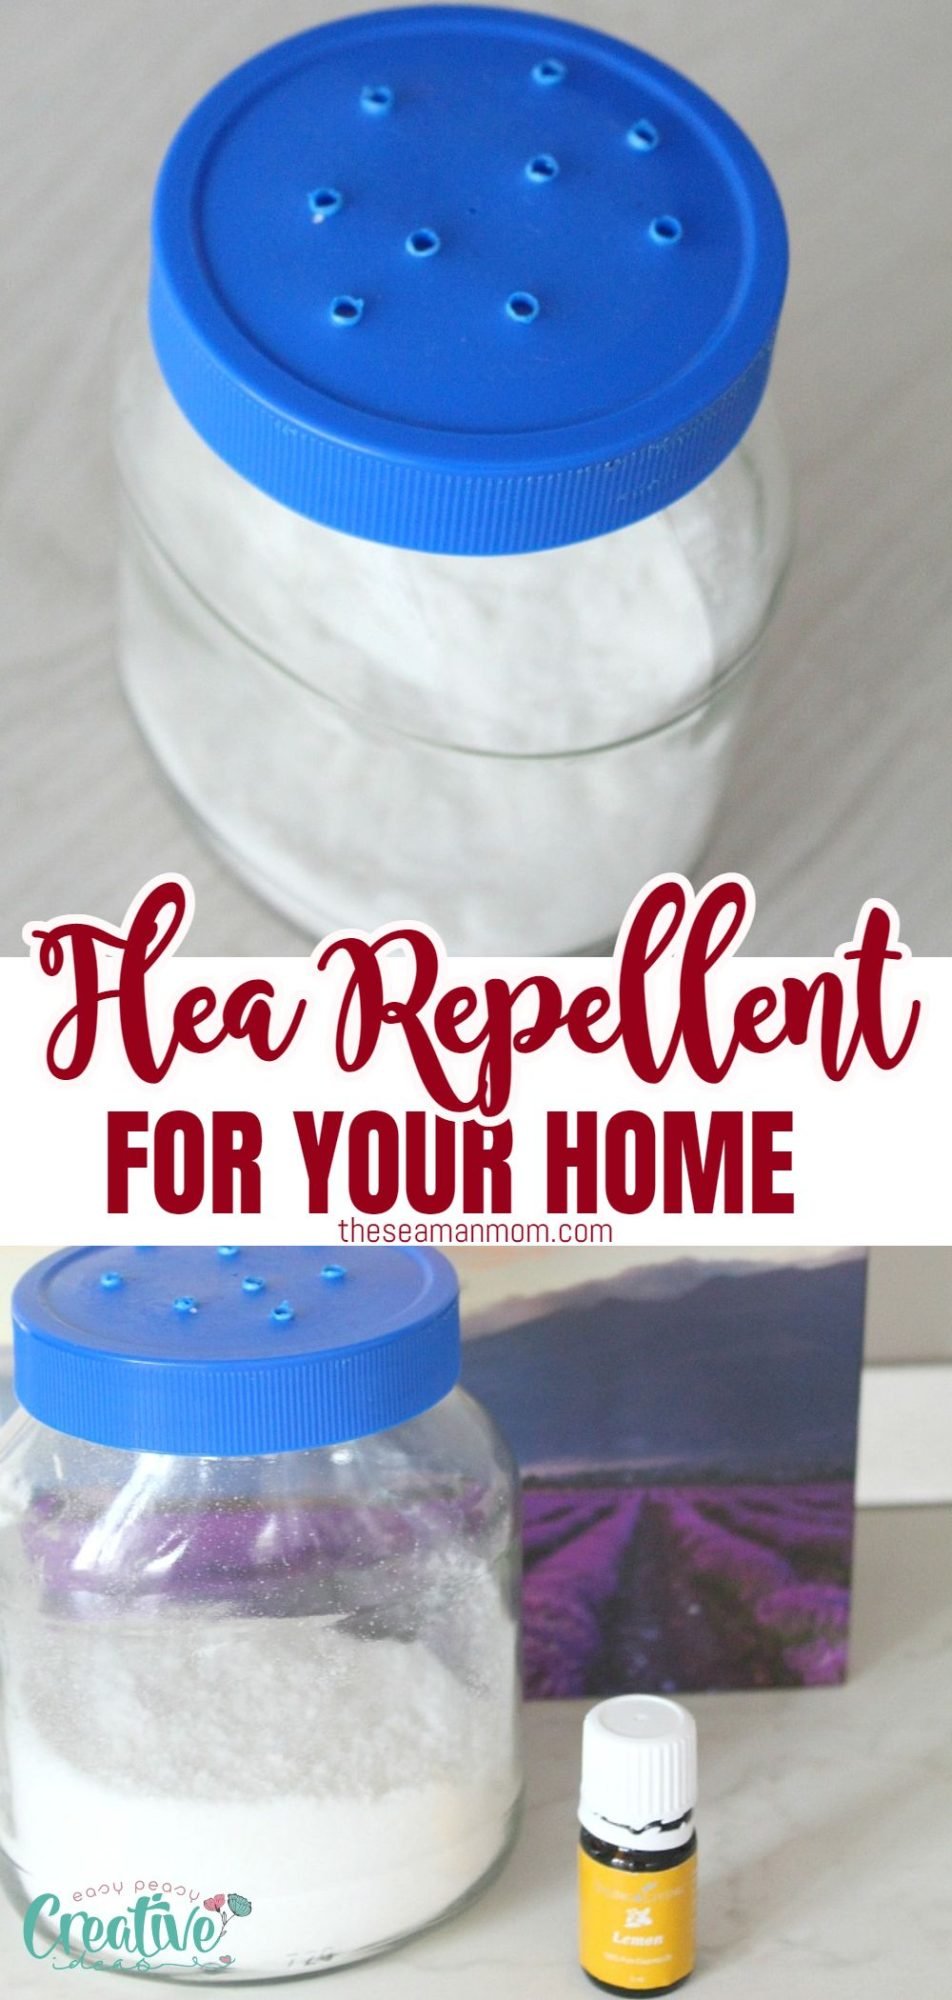 Photo collage of homemade flea repellent for home in a jar with pierced lid